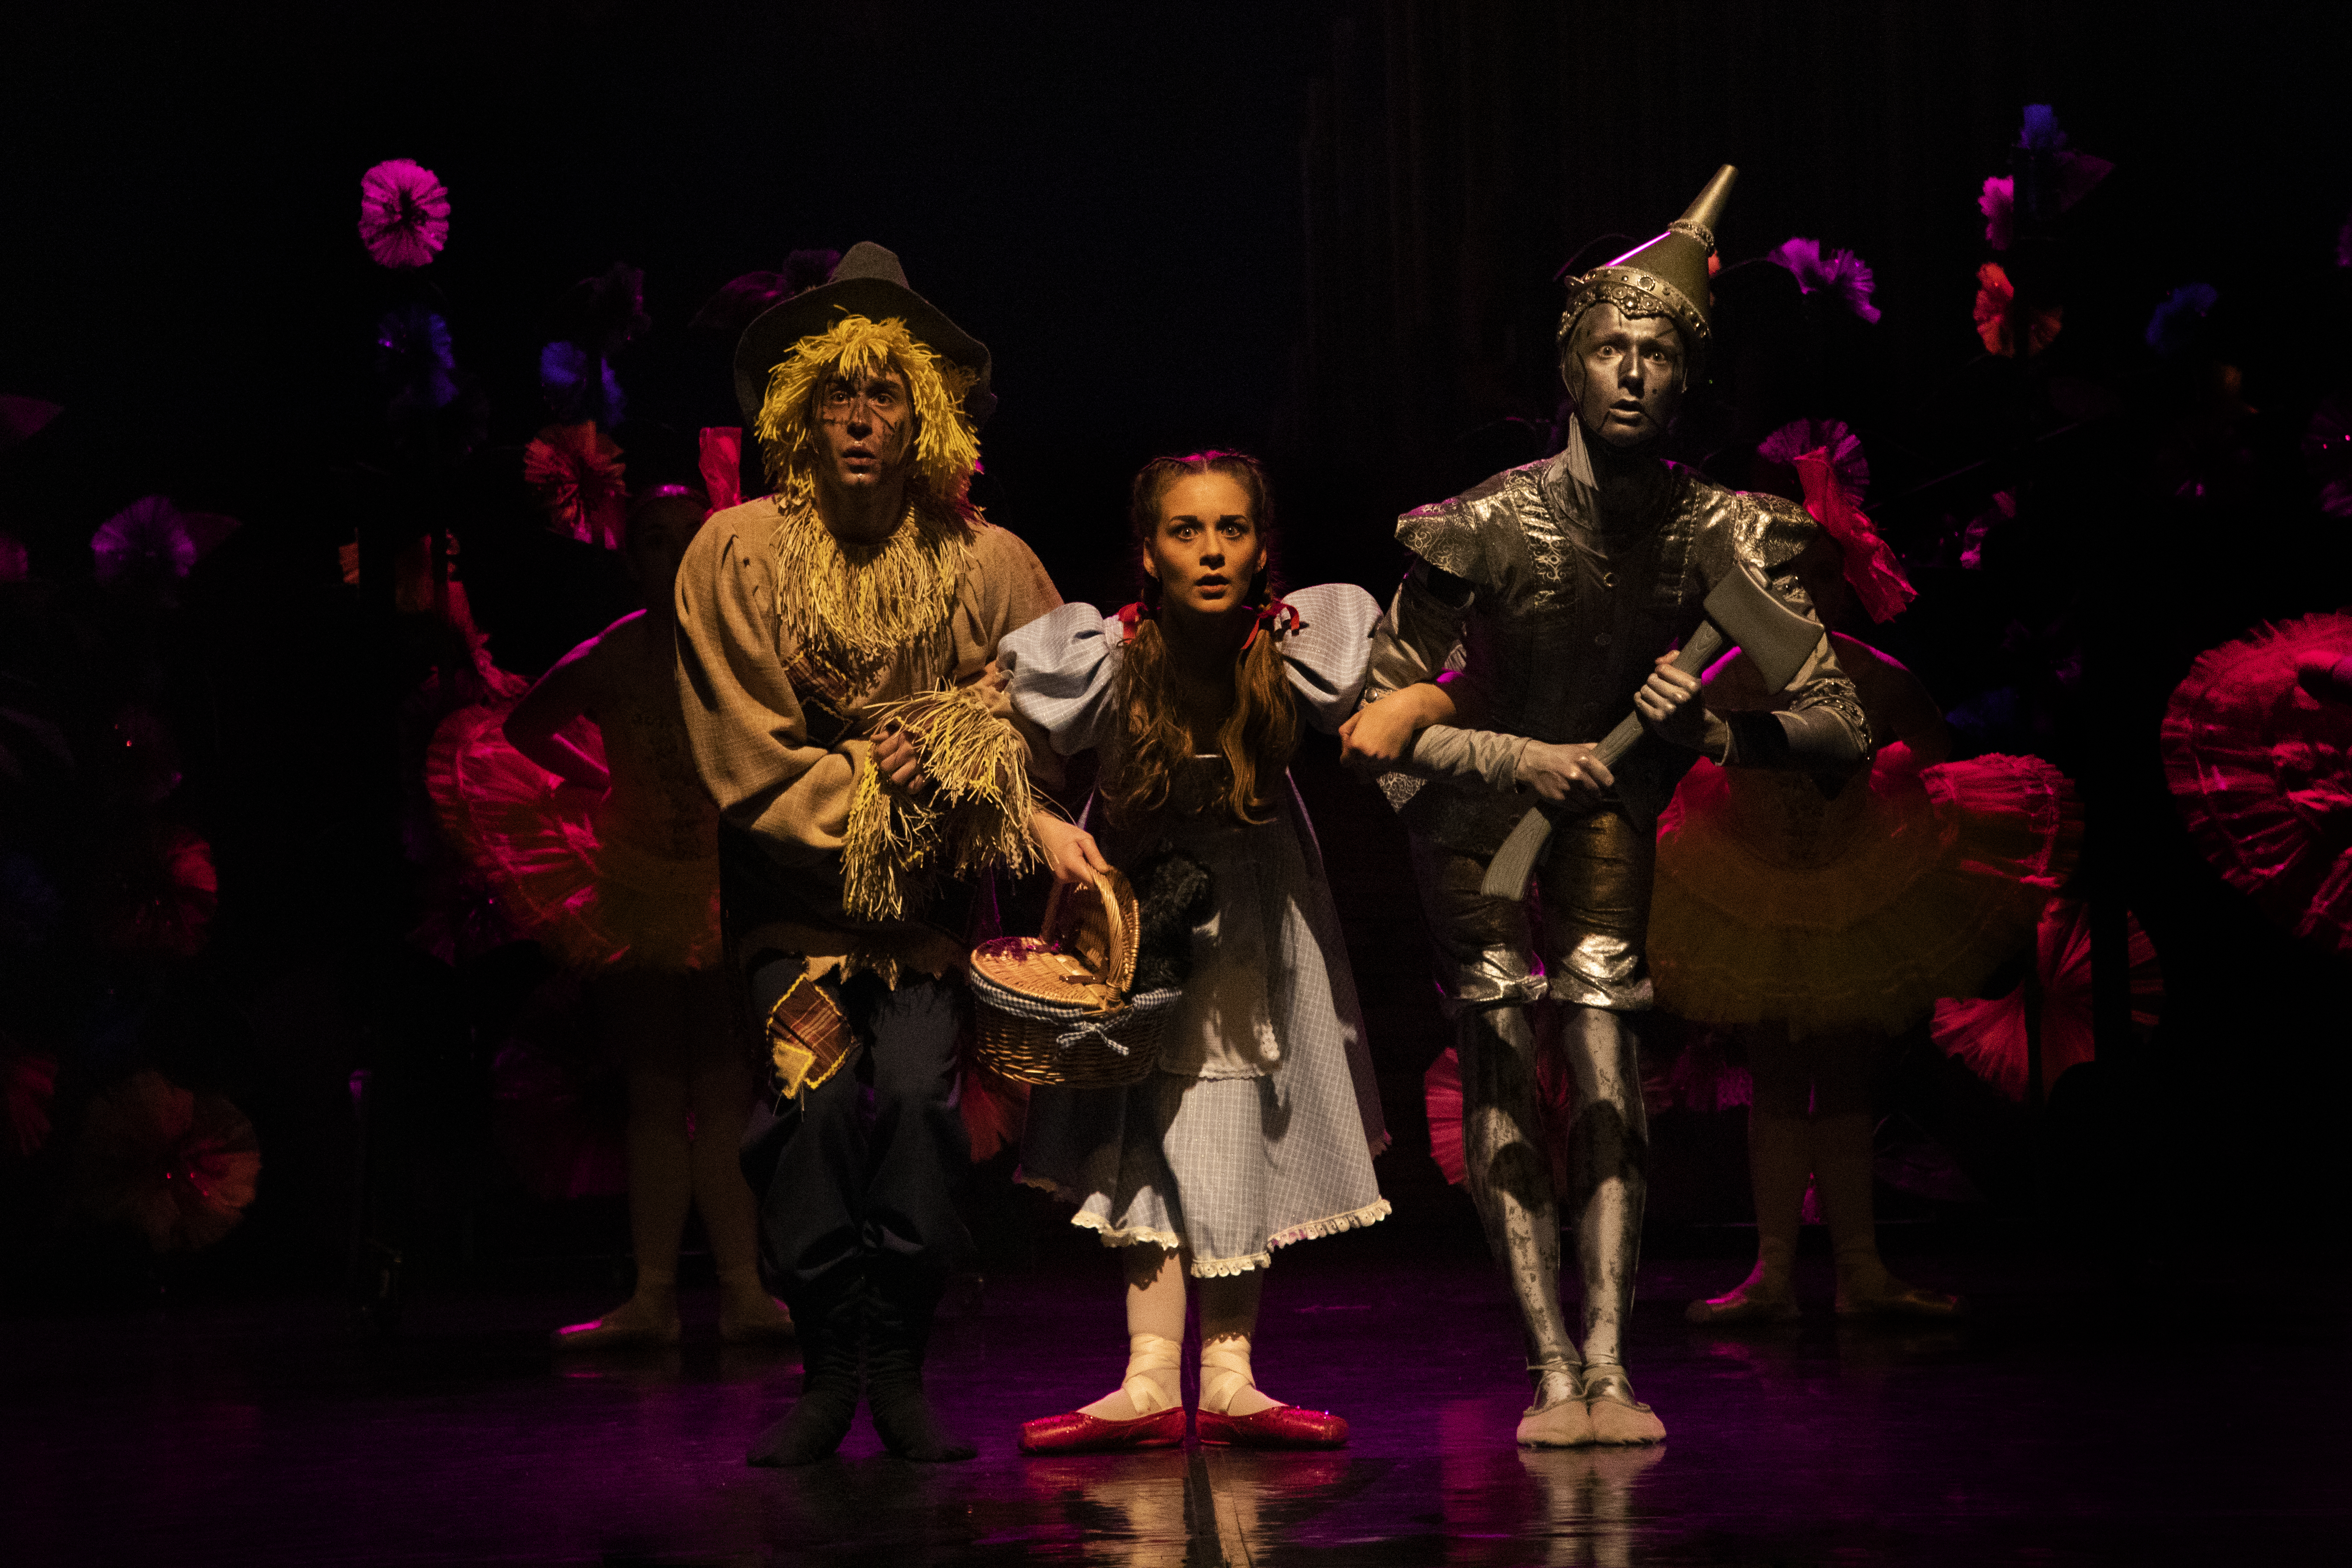 Dorothy, Scarecrow, Tinman in the Dark Forest